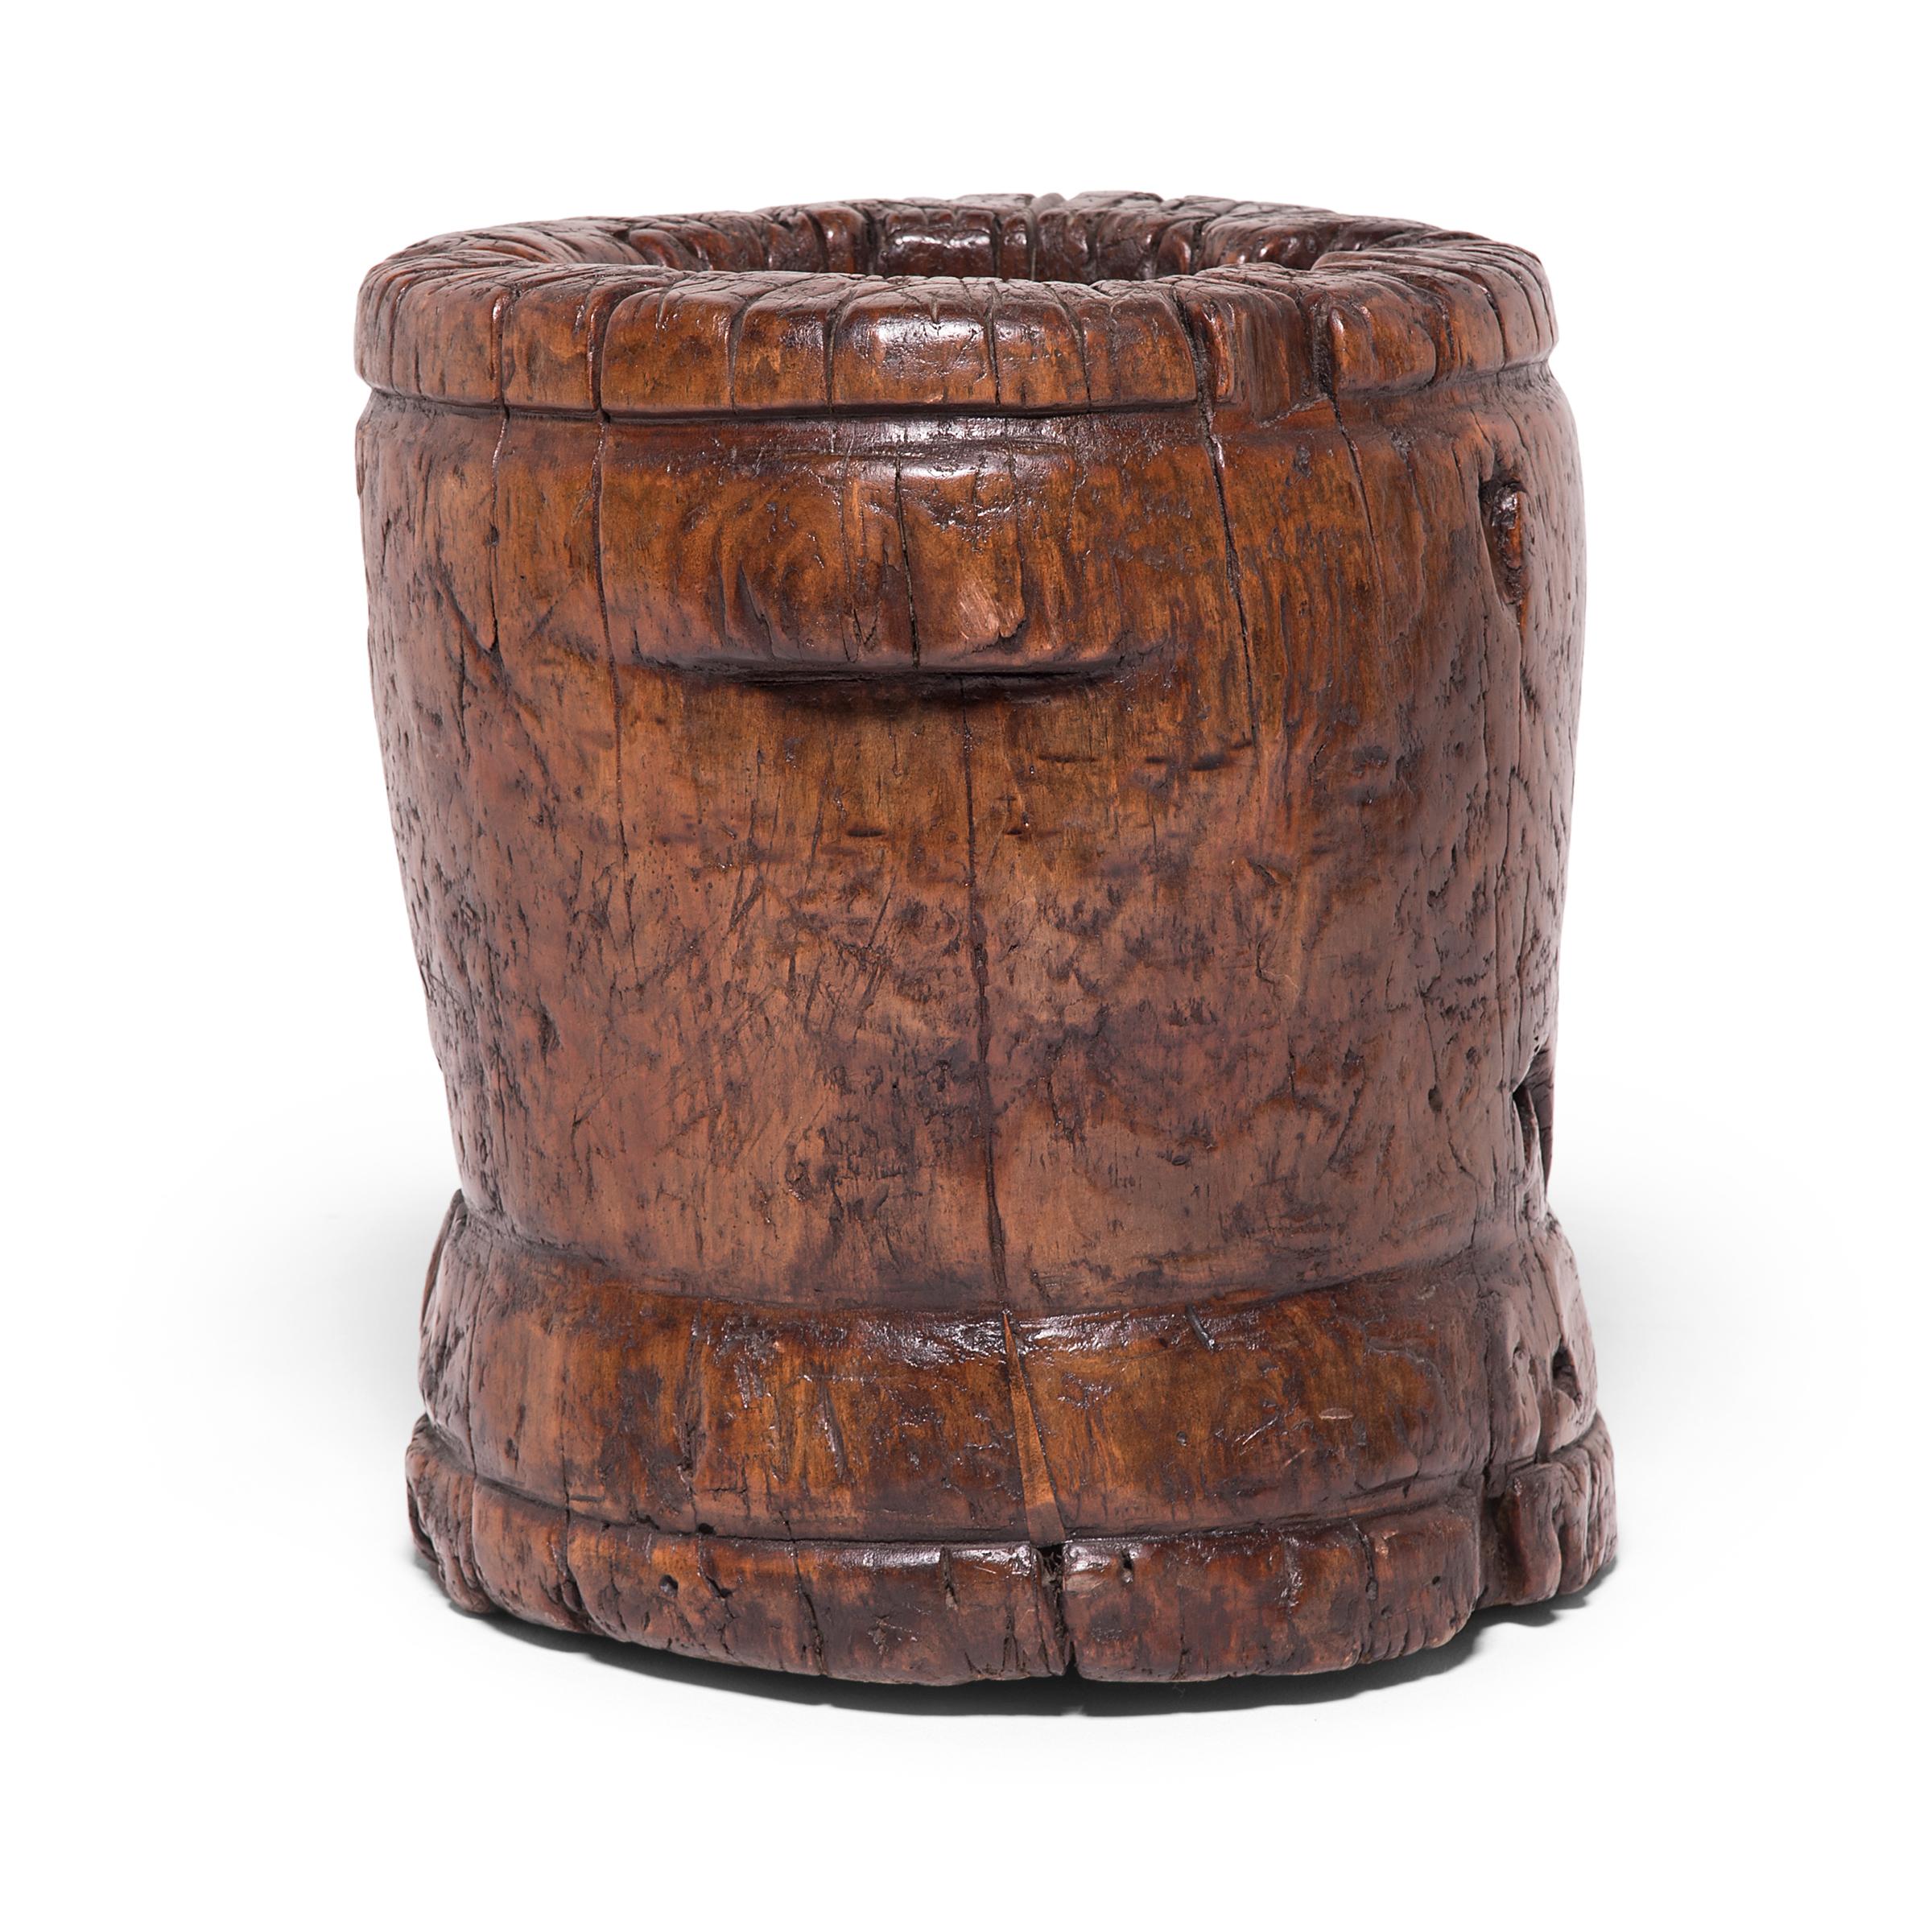 This 19th century sculptural container was originally used as a mortar, possibly in a Chinese apothecary to grind herbal medicines. Marked by petite butterfly joints and textured by the natural knots and crevices of northern elmwood, this wooden